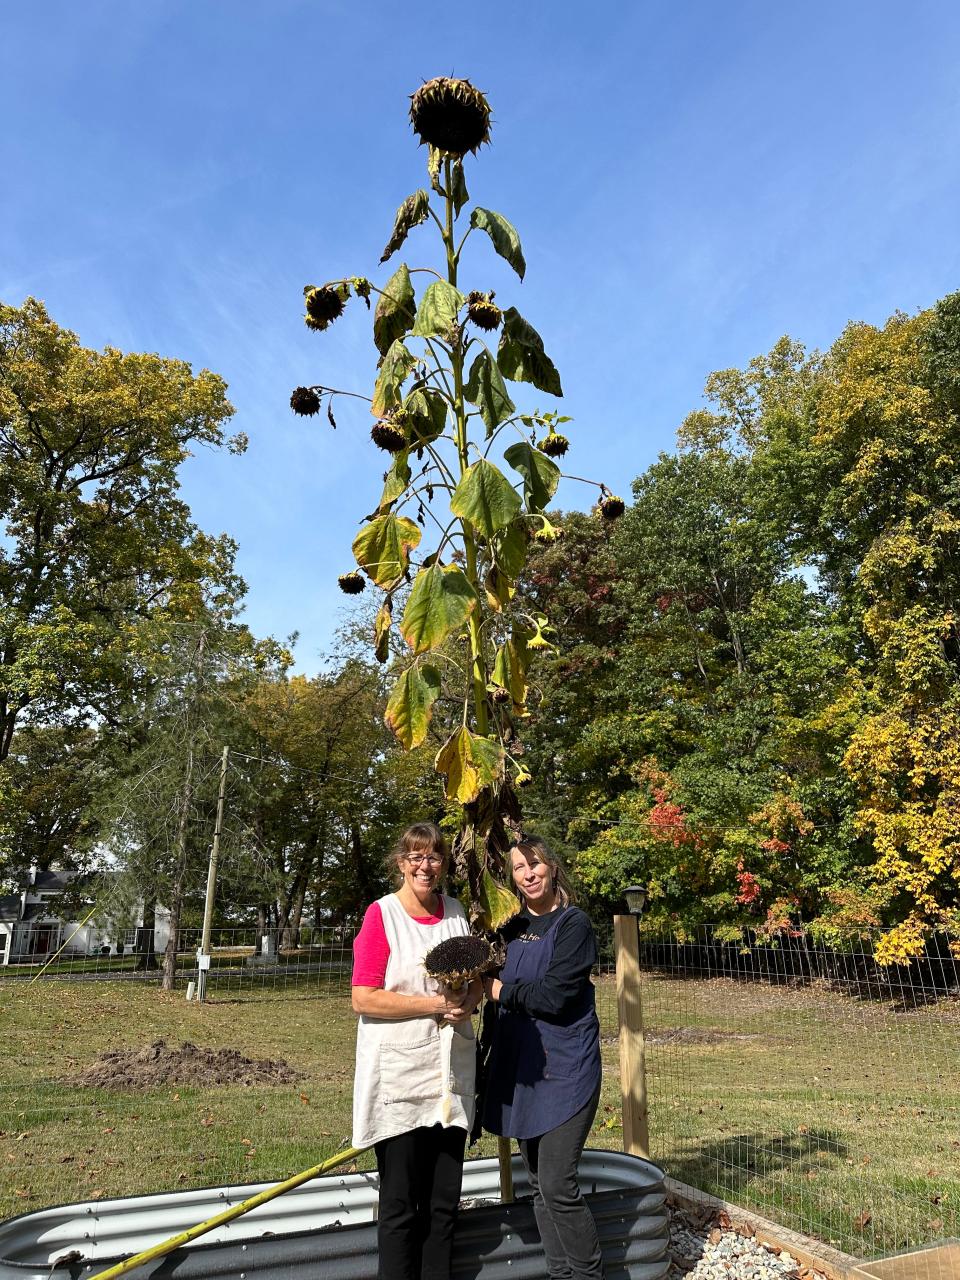 Michelle Salyers and her partner Linda Williams are by a sunflower. Over the summer, they cut down this sunflower in their garden so they could use the seeds to dye with.